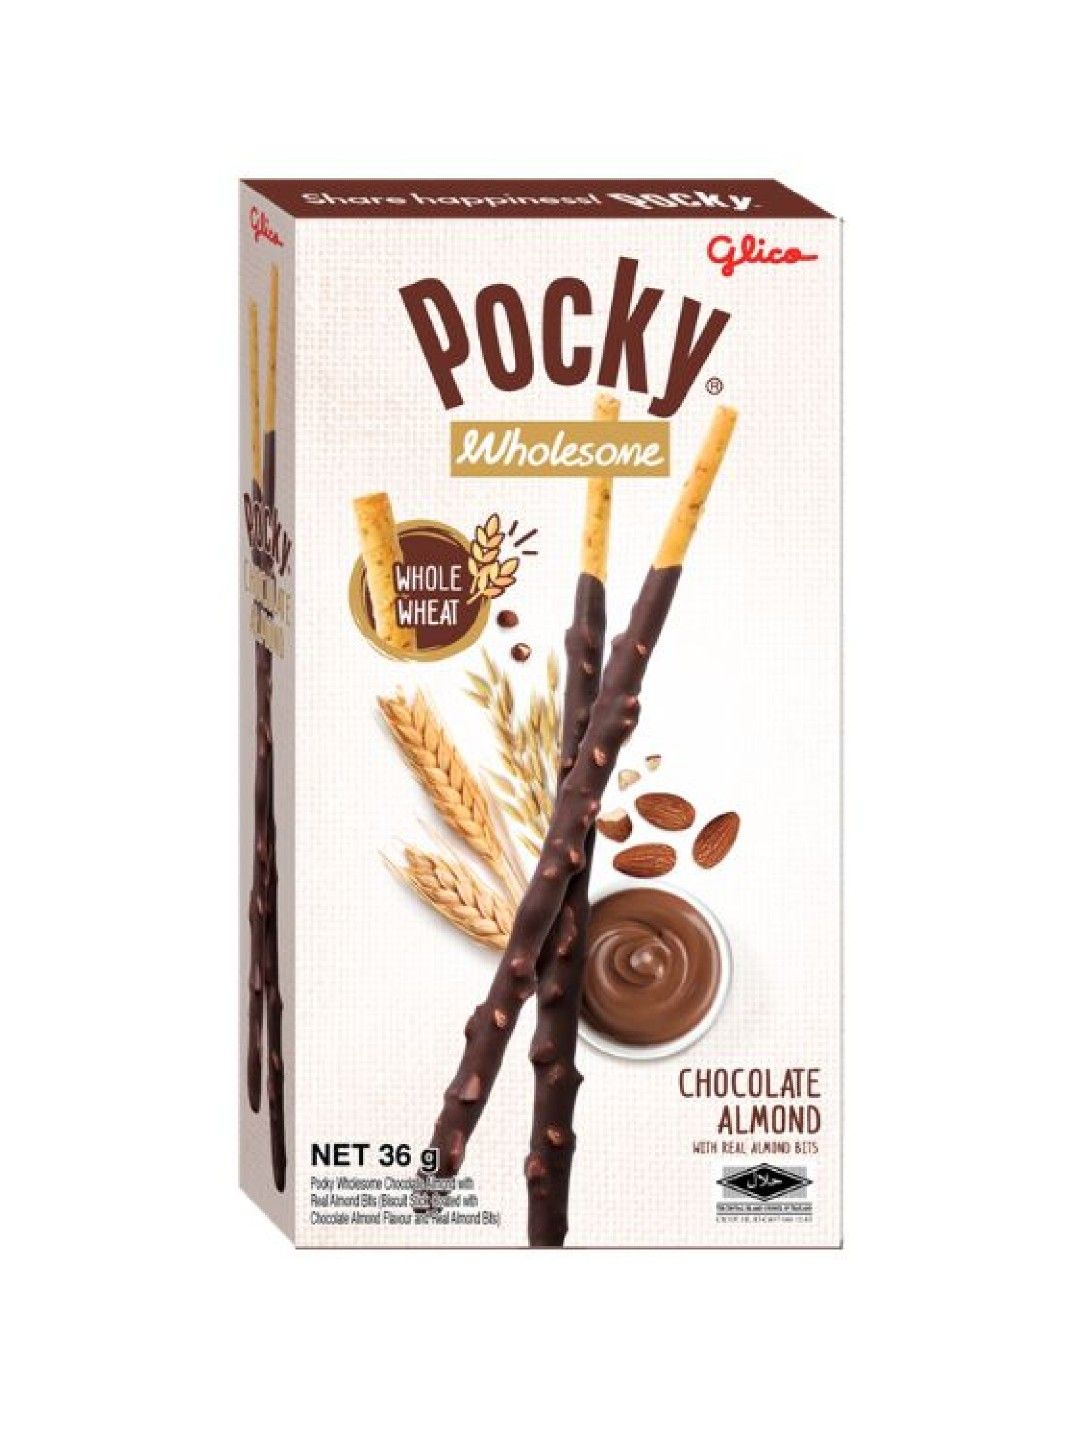 Pocky Wholesome Chocolate Almonds Biscuit Sticks (No Color- Image 1)